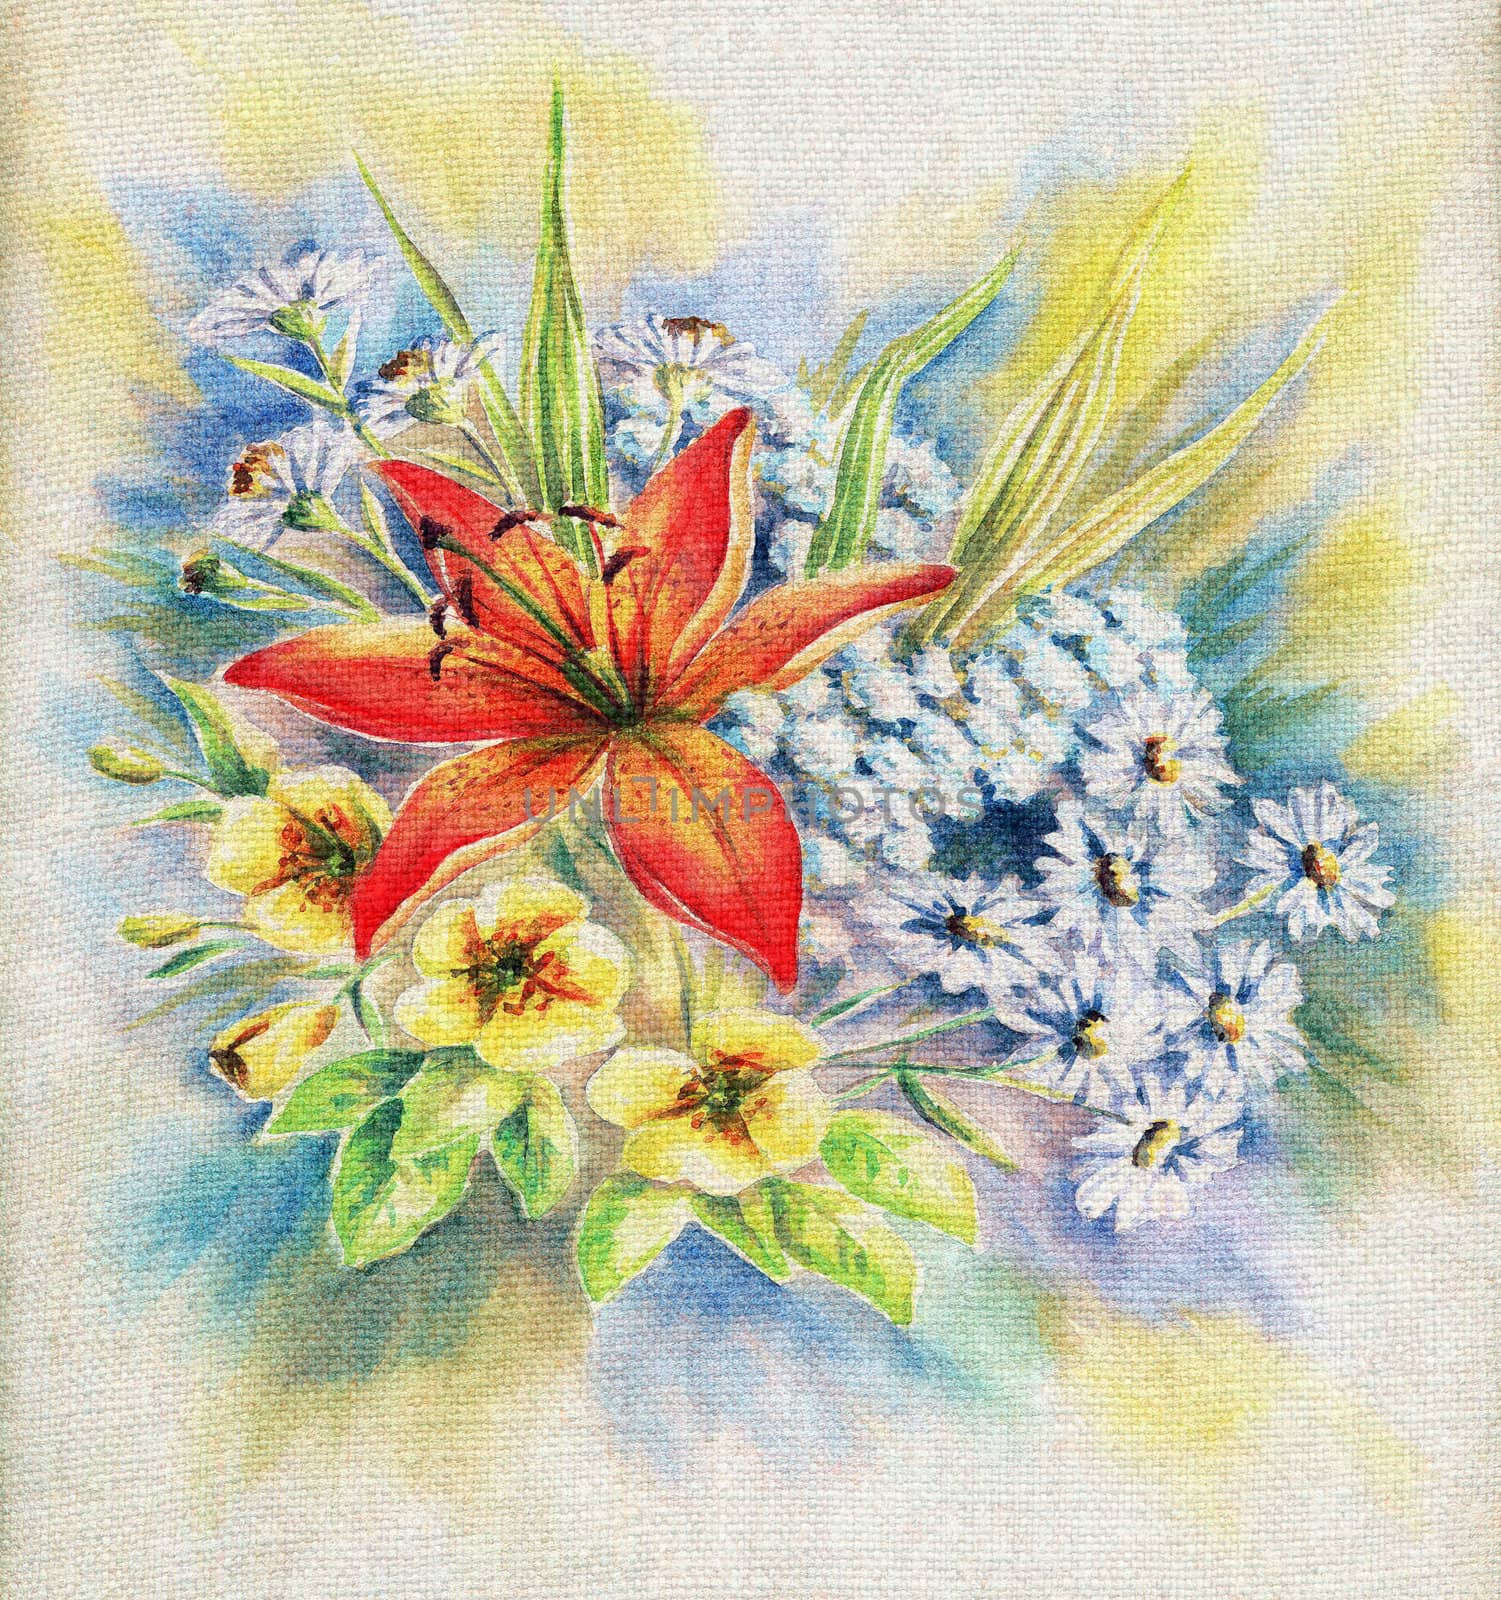 Flowers, bouquet with a lily, picture oil paints on a canvas